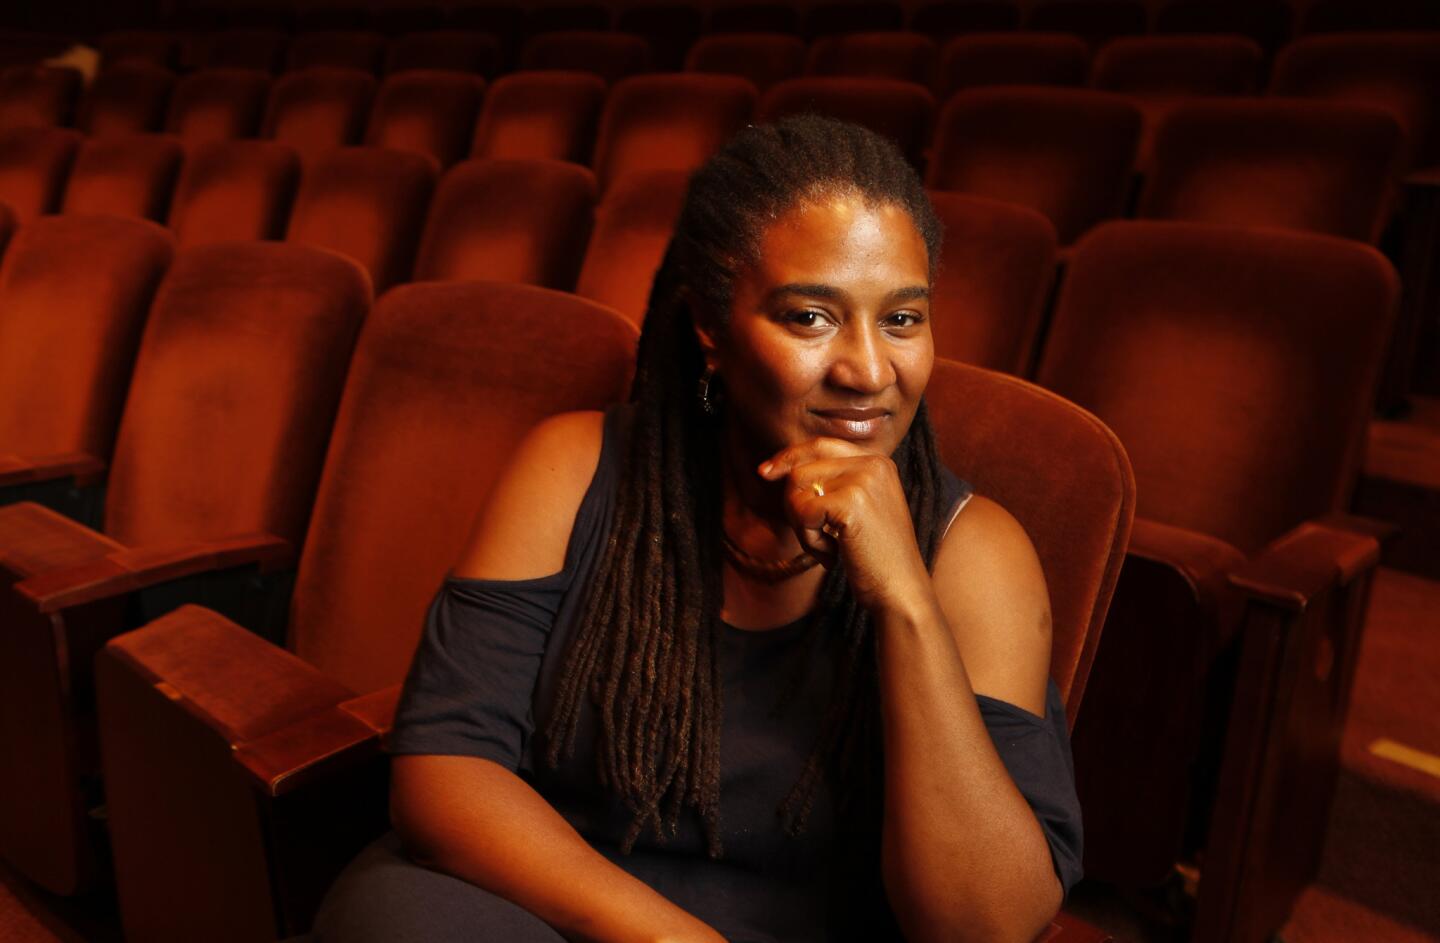 Arts and culture in pictures by The Times | Lynn Nottage